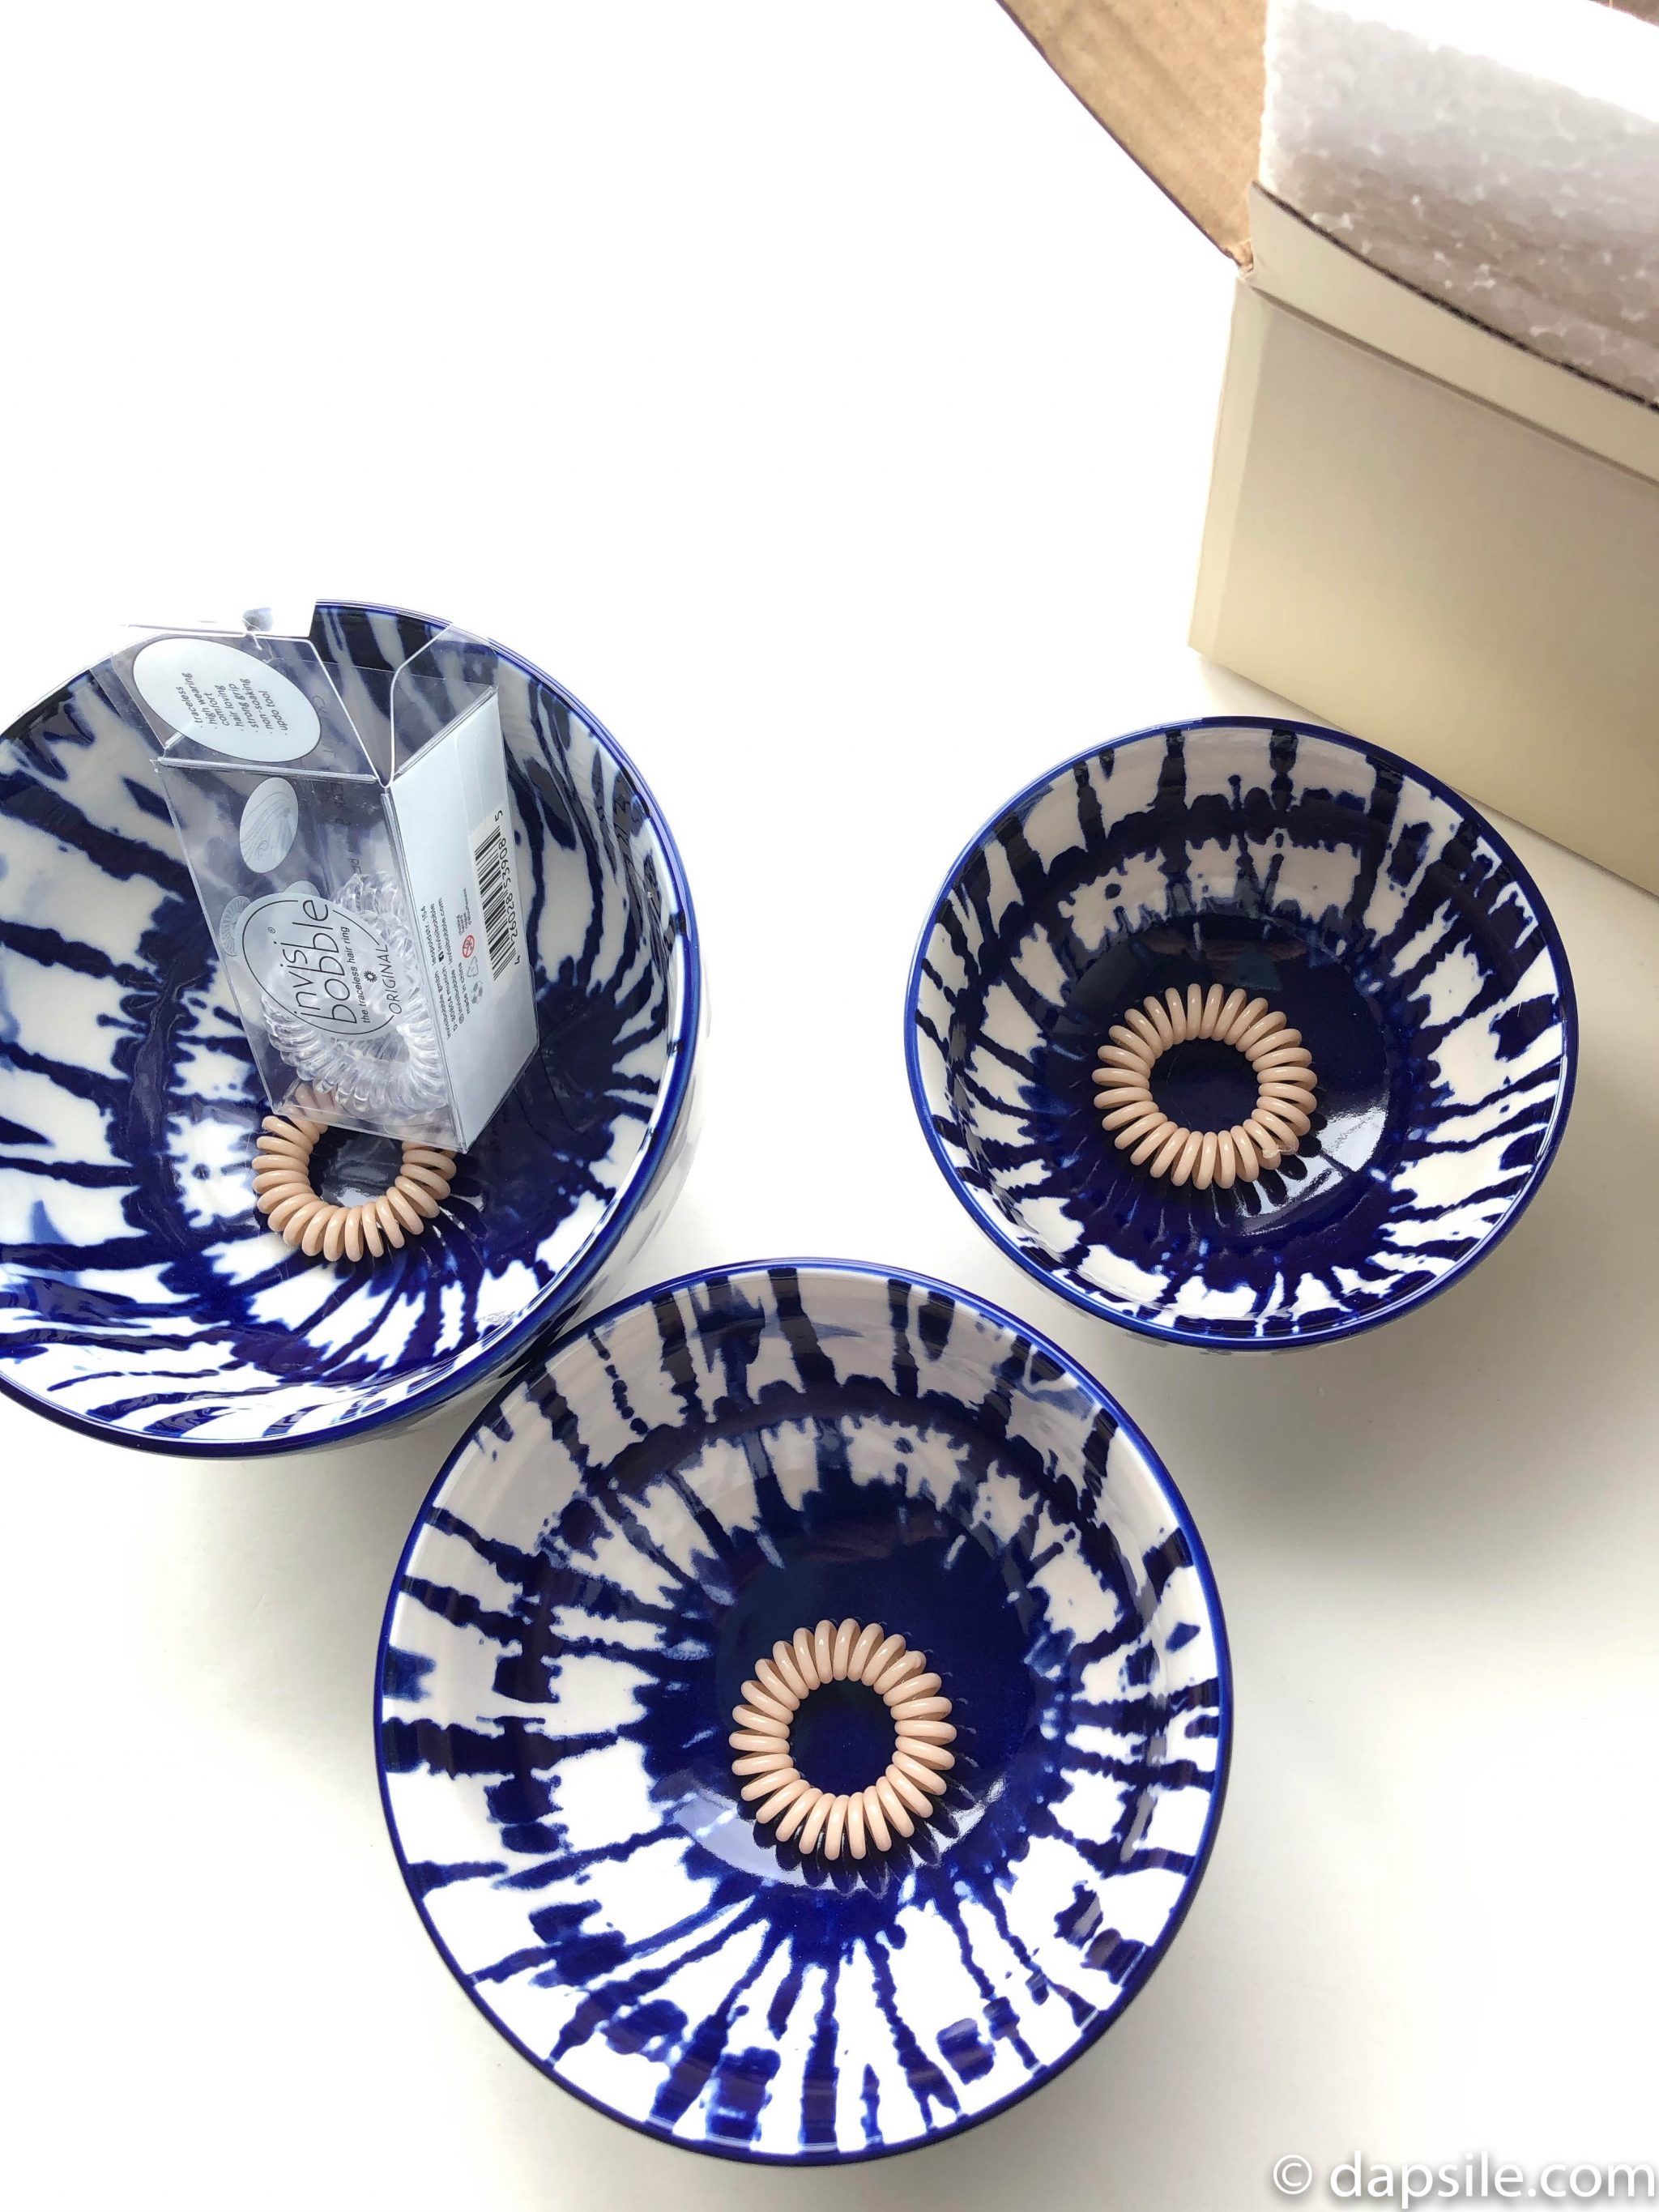 West Elm Indigo Tie-Dye Bowls from the top showing size with InvisiBobbles